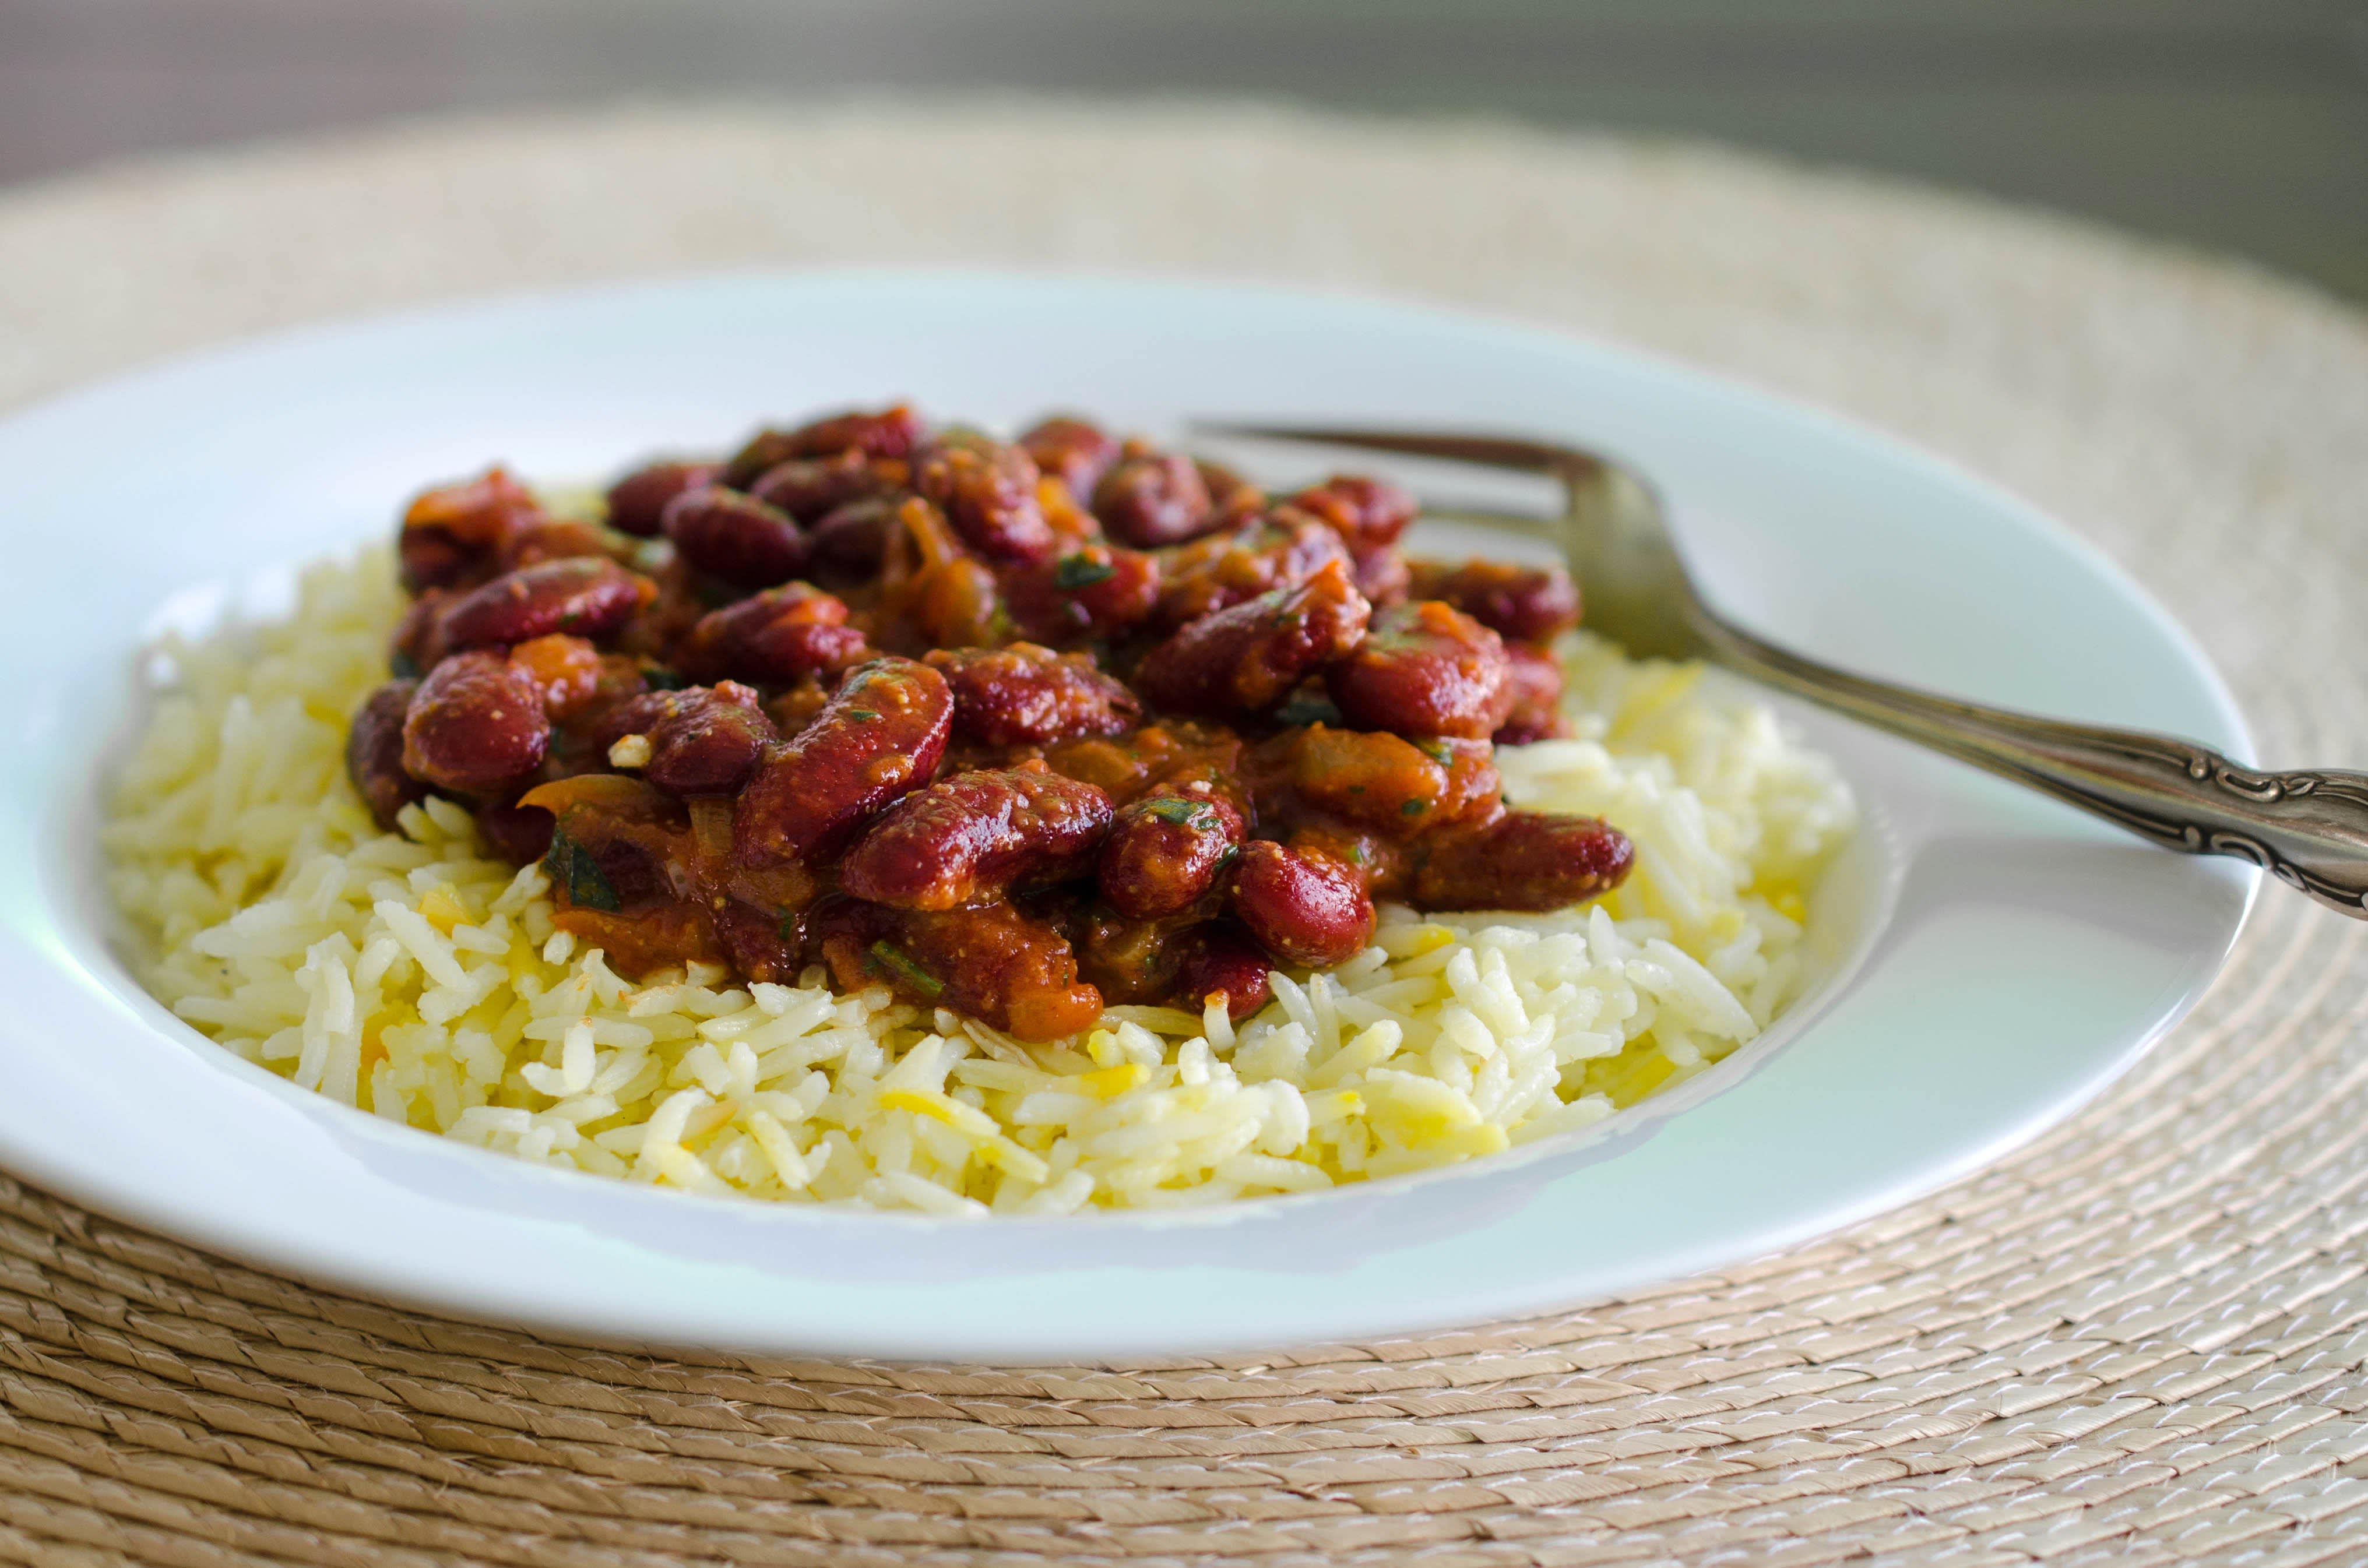 Recipe: Red Kidney Bean Curry with Rice (Rajmah Chawal) | Kitchn